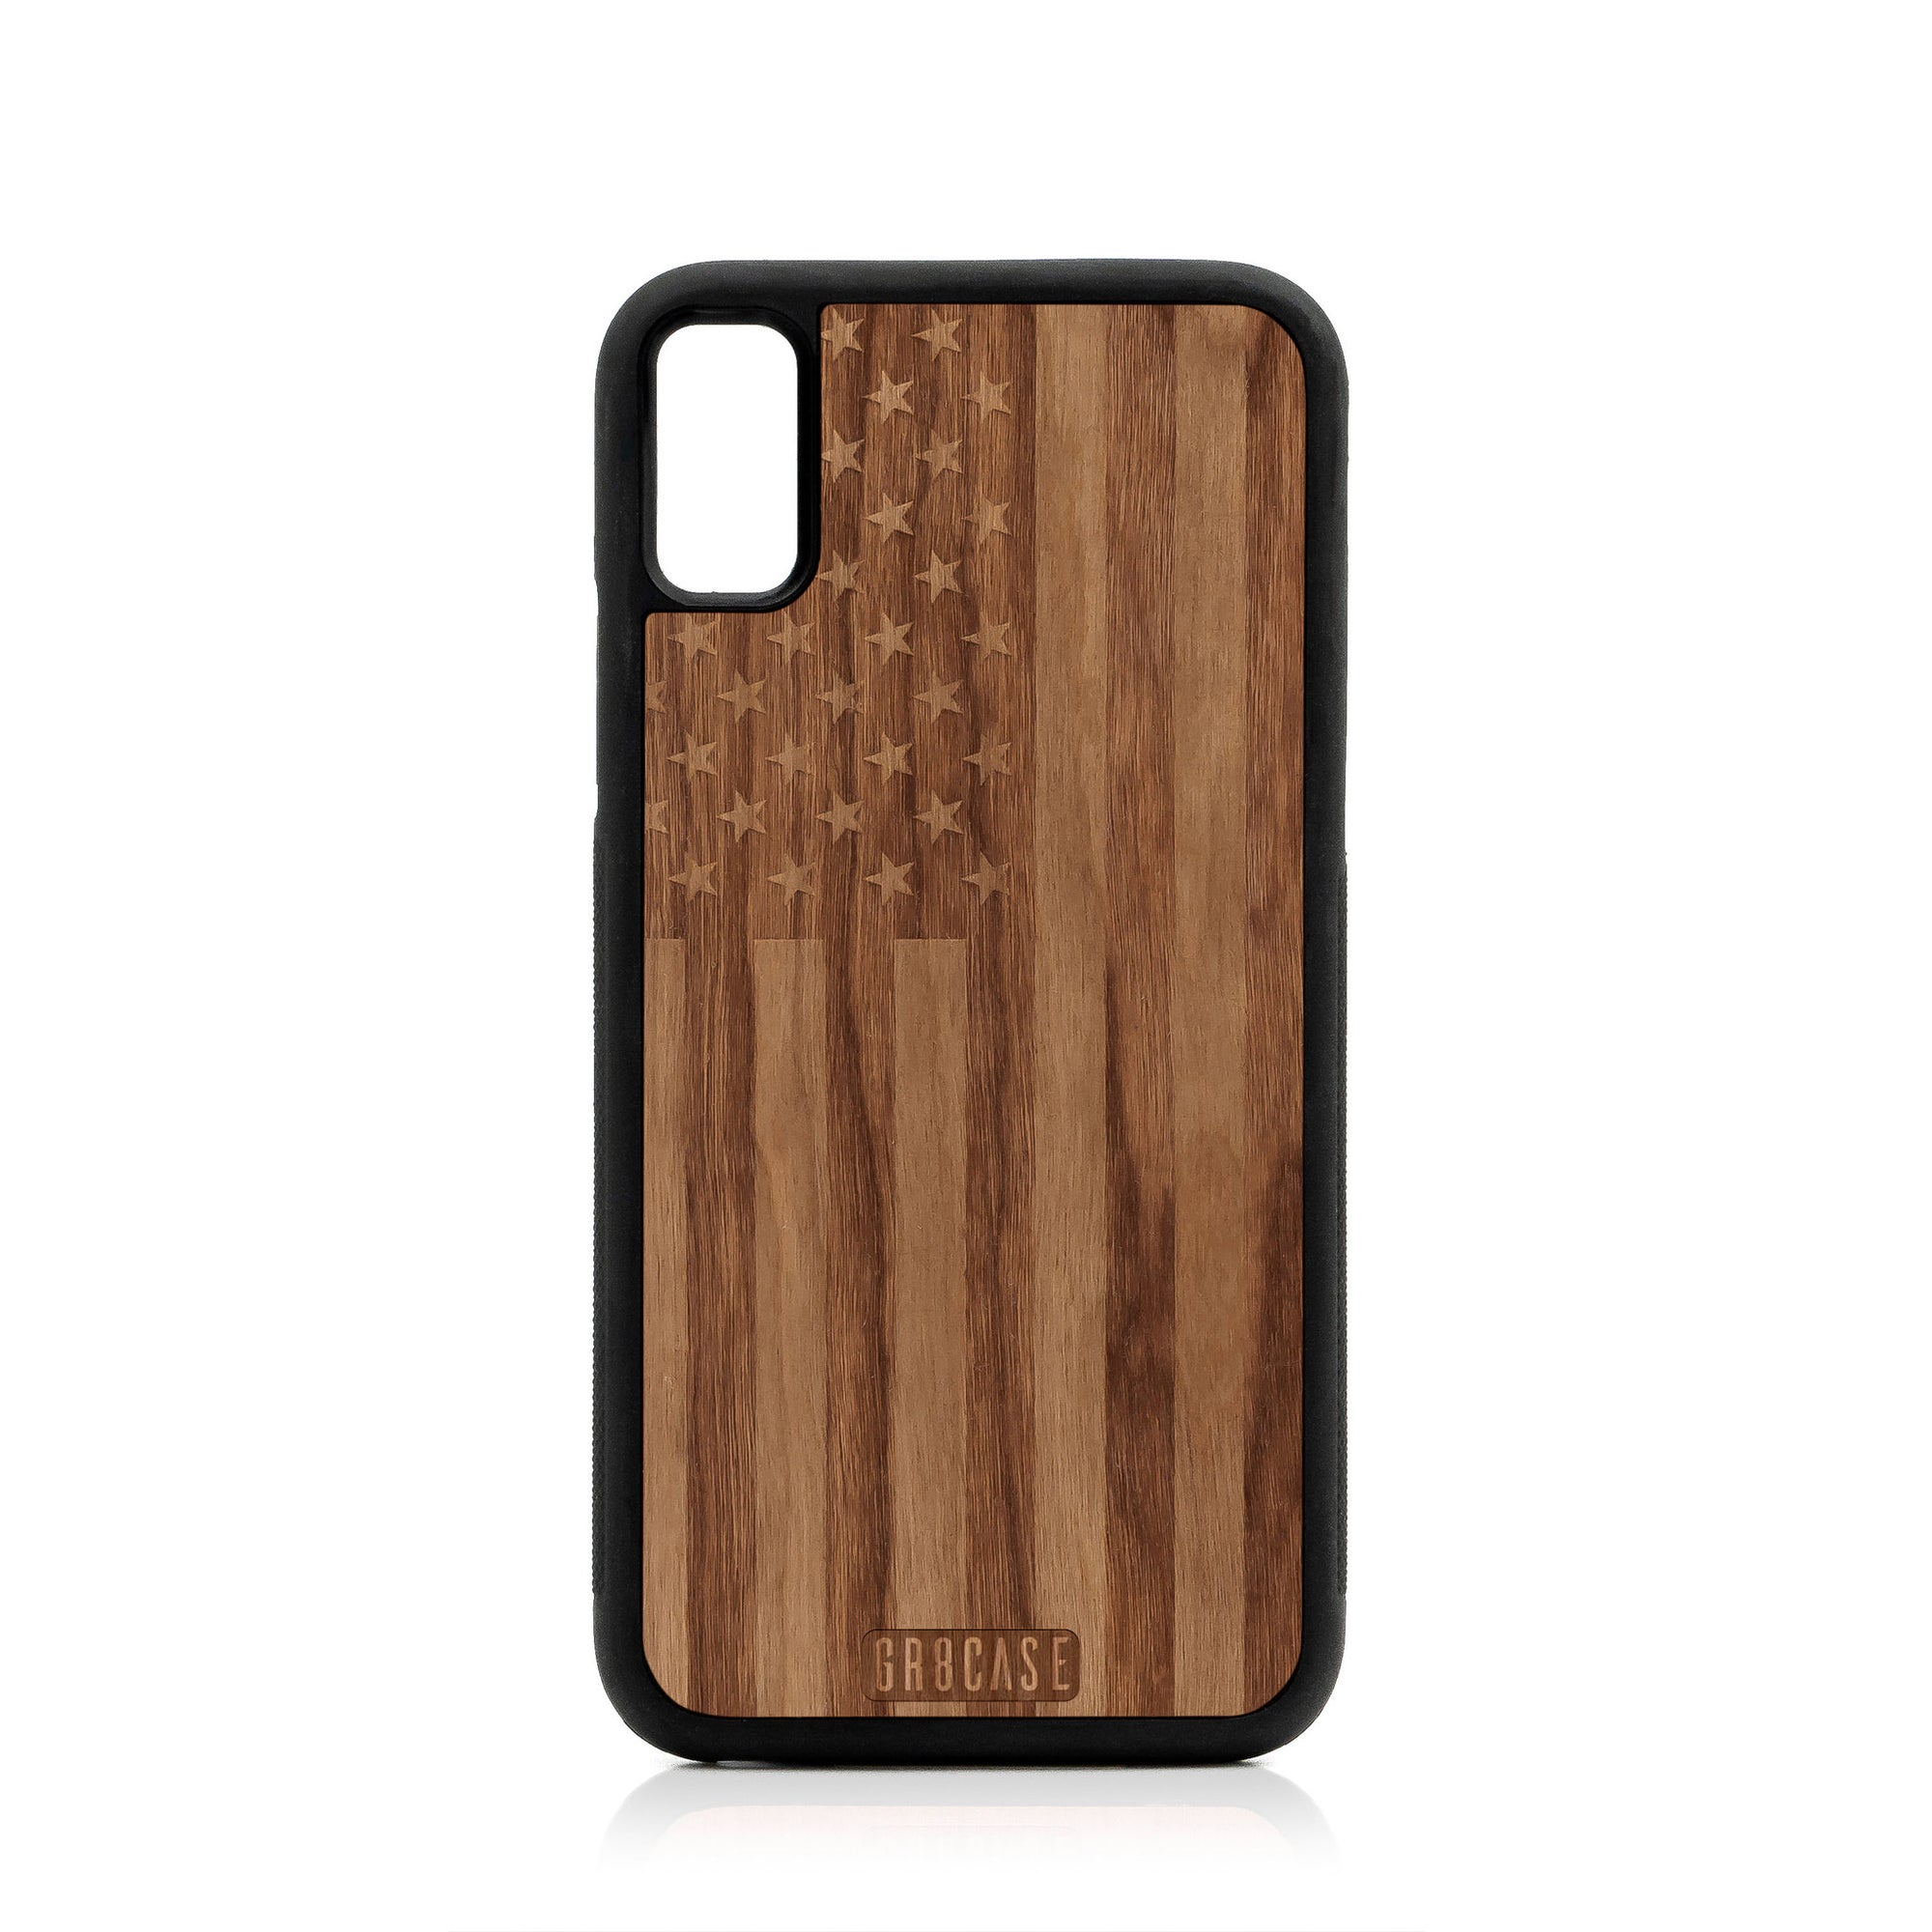 USA Flag Design Wood Case For iPhone XR